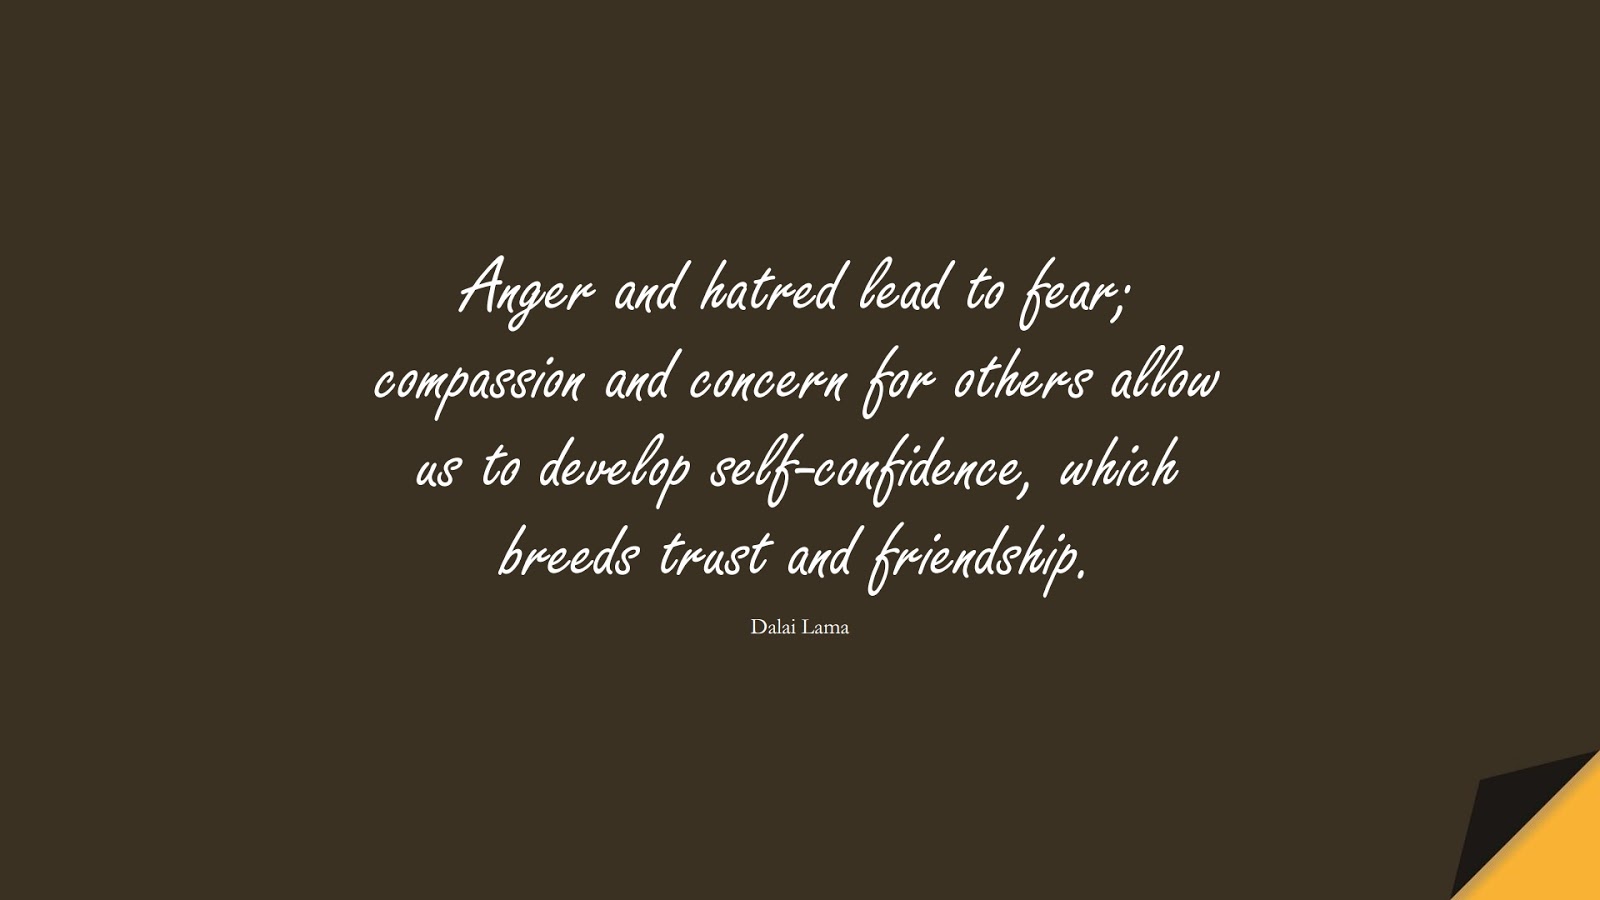 Anger and hatred lead to fear; compassion and concern for others allow us to develop self-confidence, which breeds trust and friendship. (Dalai Lama);  #FearQuotes